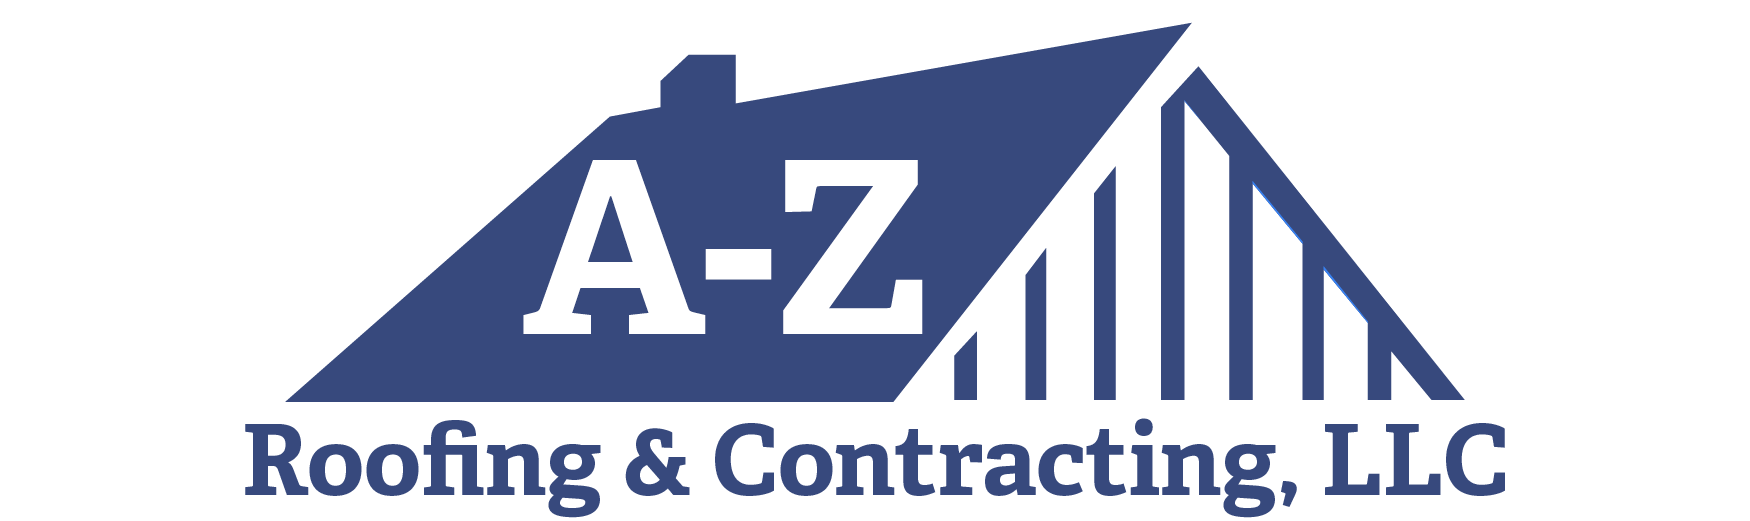 A-Z Roofing & Contractors